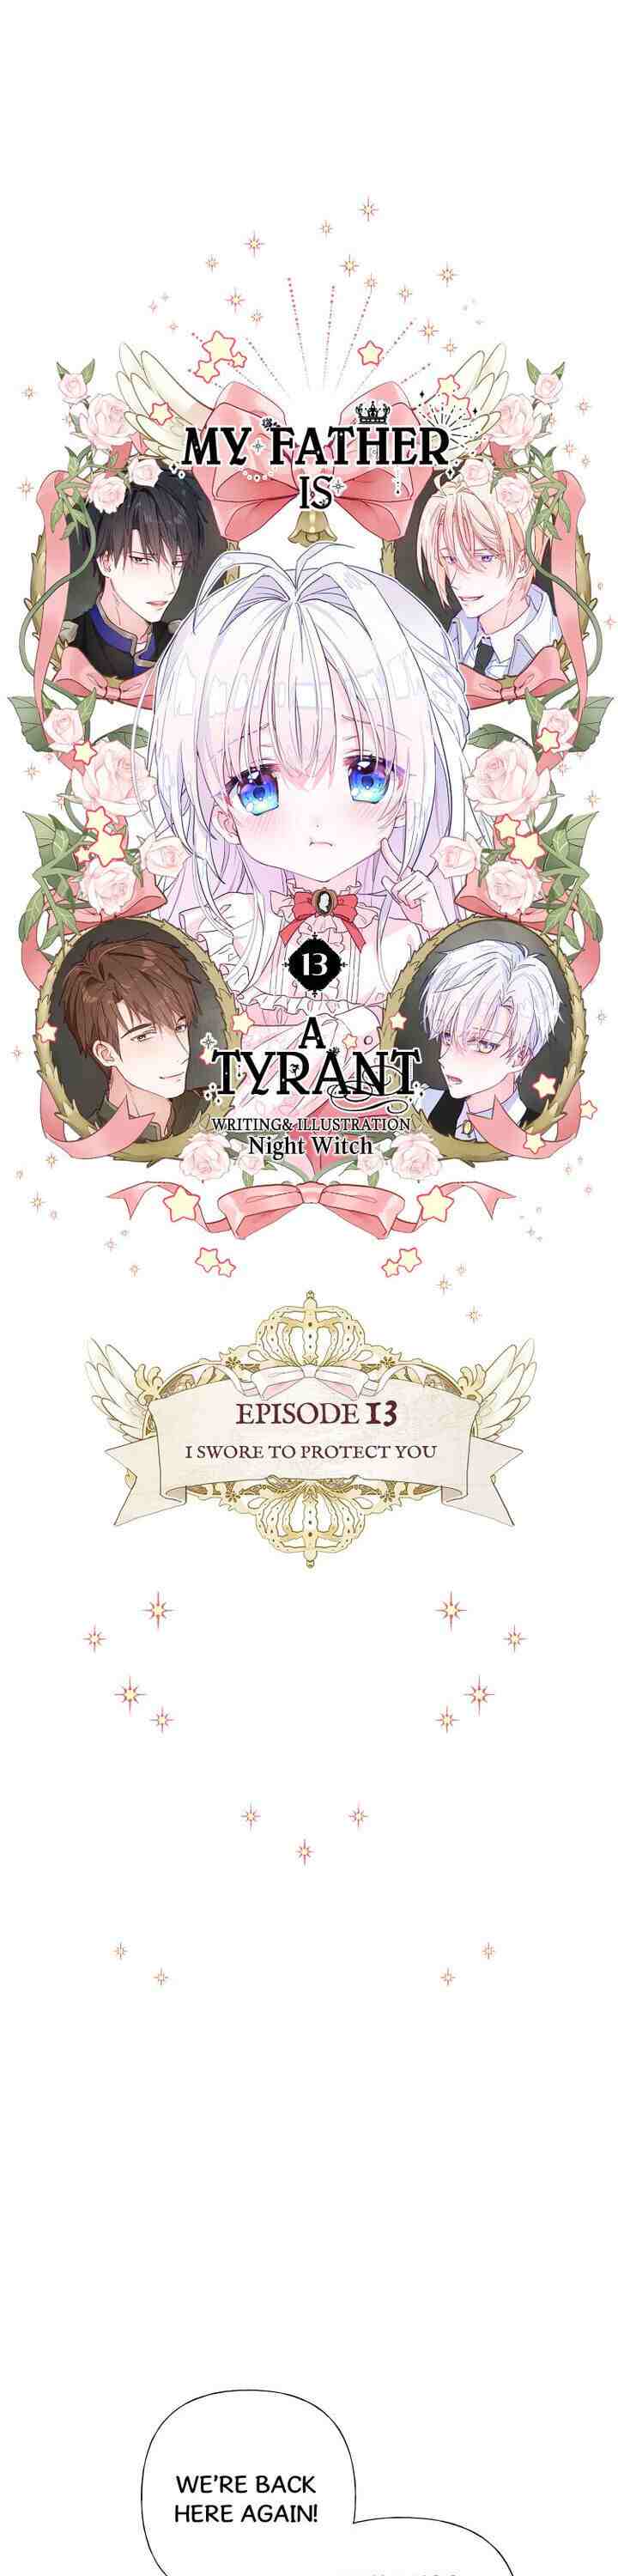 Choose Your Real Daddy Tyrant chapter 13